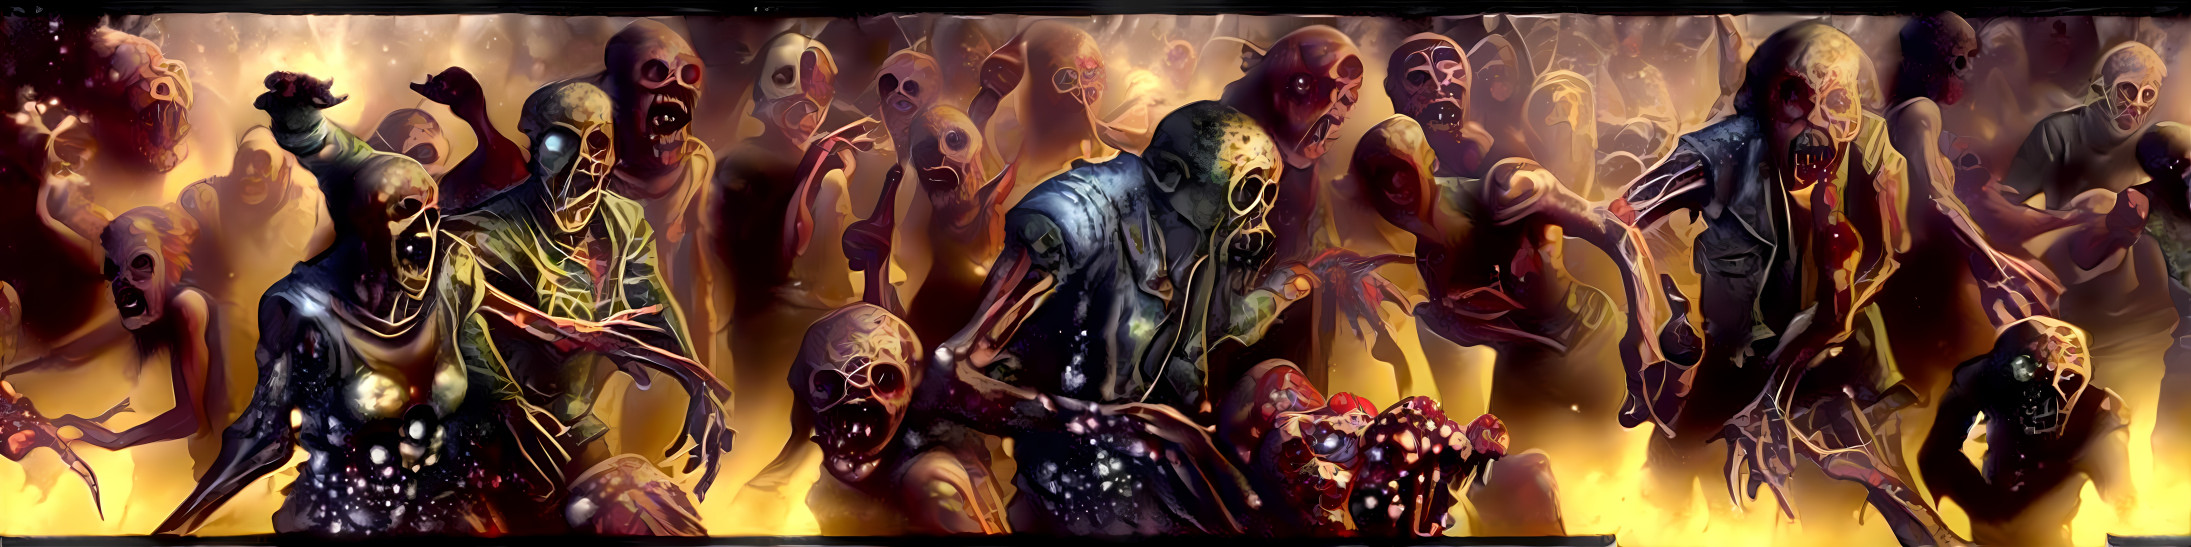 Army of the Undead 